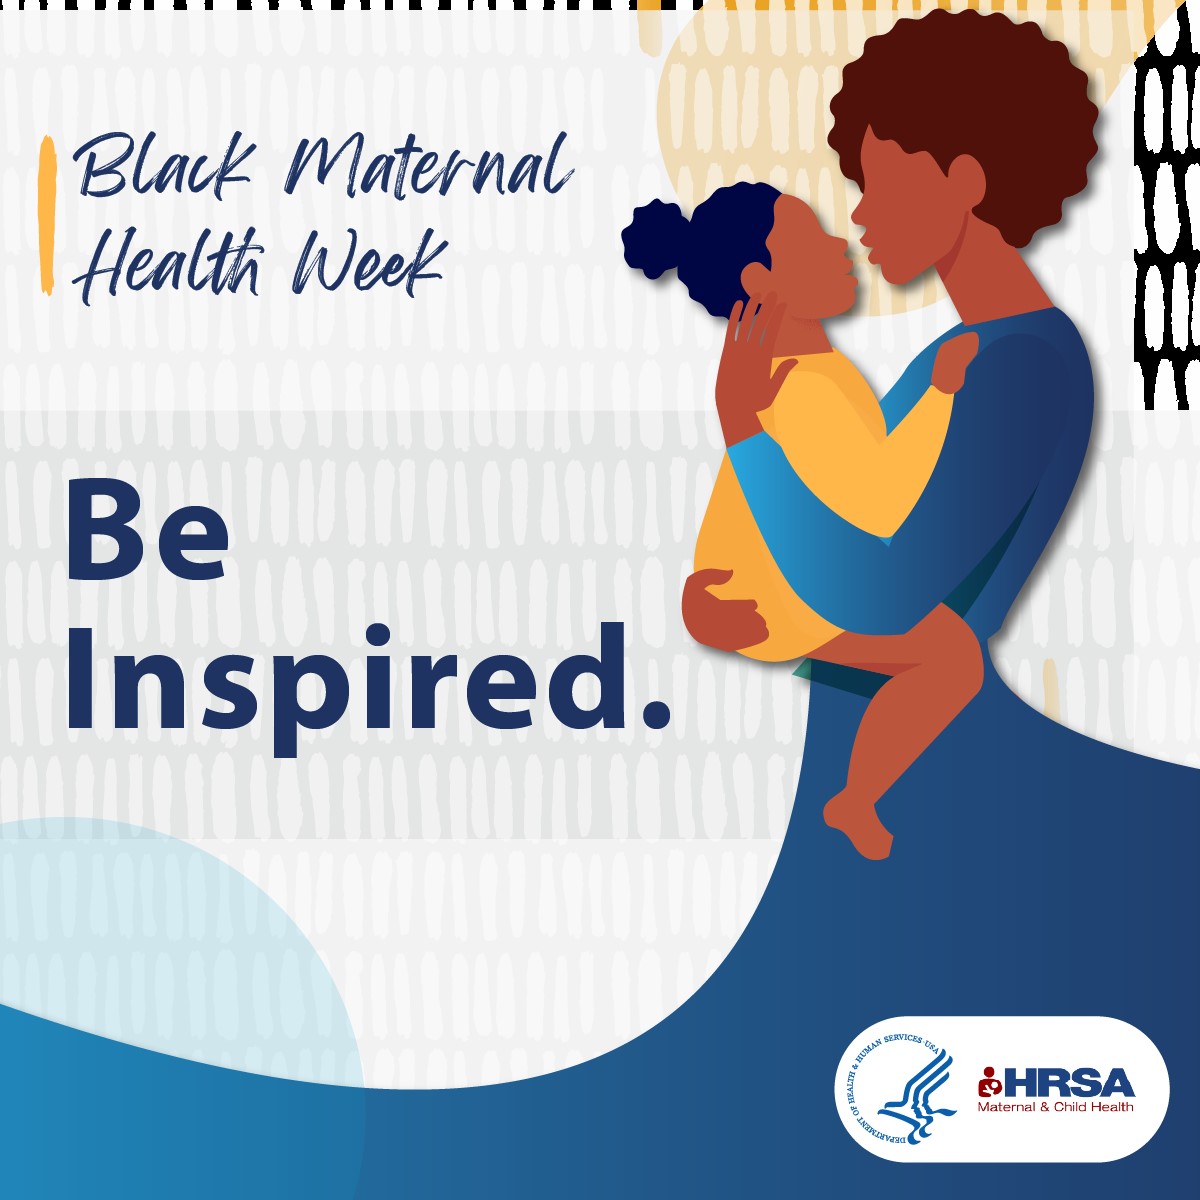 We’re inspired by our #OhioHeadStart agencies for their contributions to continually learning more and providing culturally sensitive care to mothers and families in their programs. #BMHW24 #HRSAhelpsMoms #BlackMaternalHealthWeek #ENDMaternalMortality #HeadStart #EarlyHeadStart